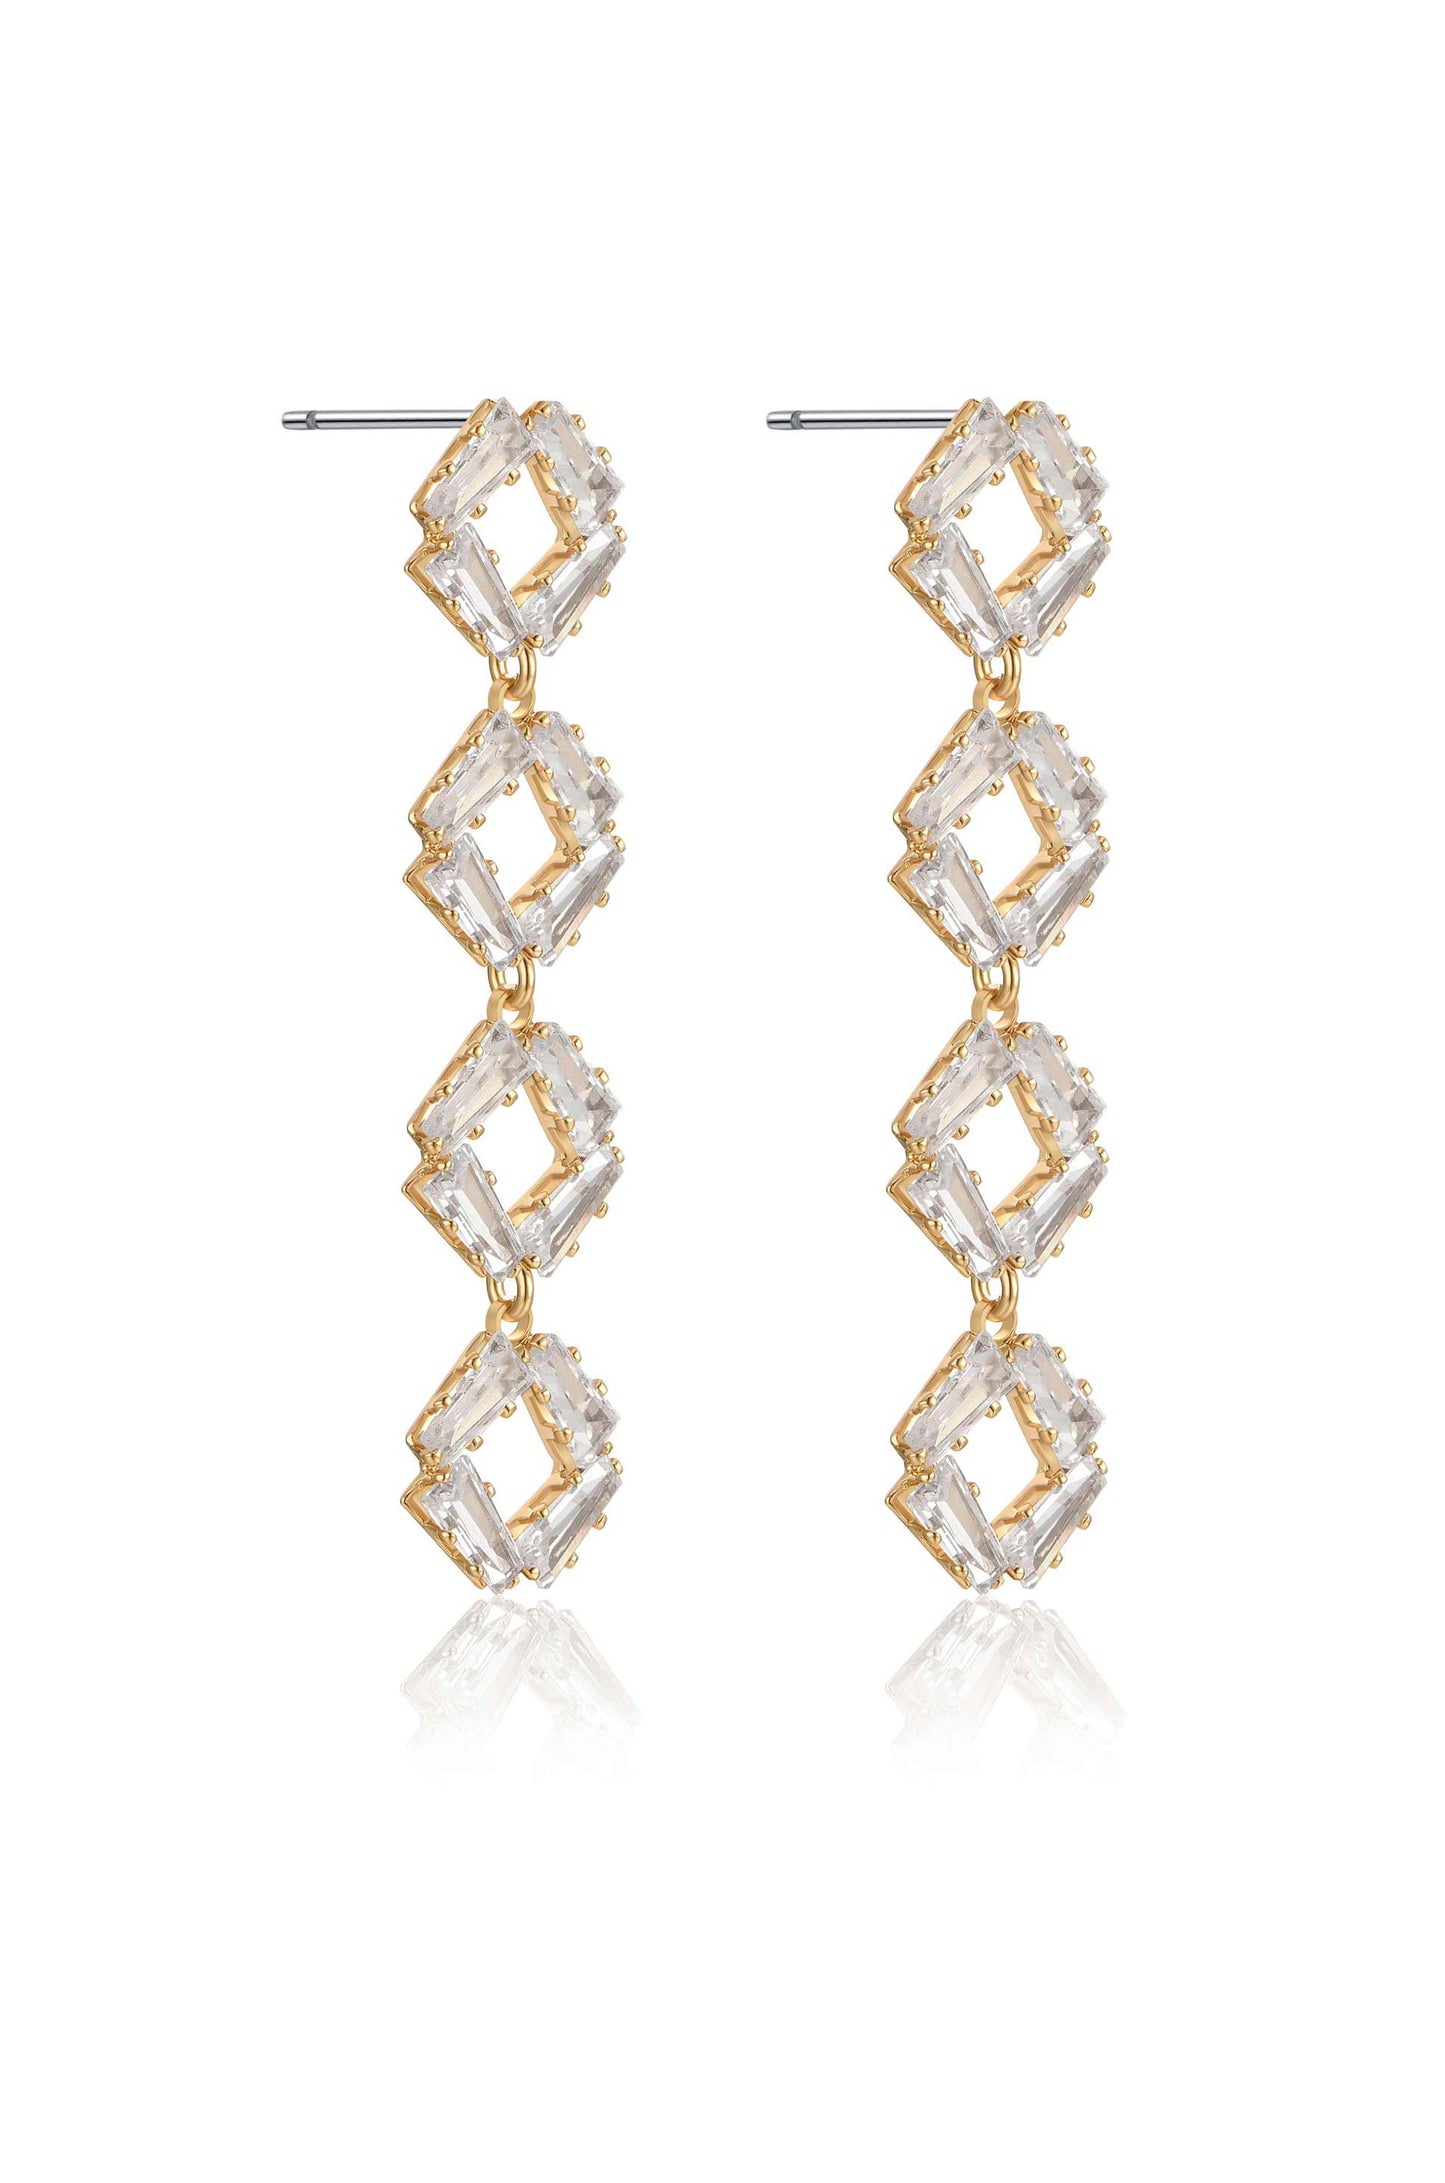 Never Dull your Shine 18k Gold Plated Crystal Drop Earrings side